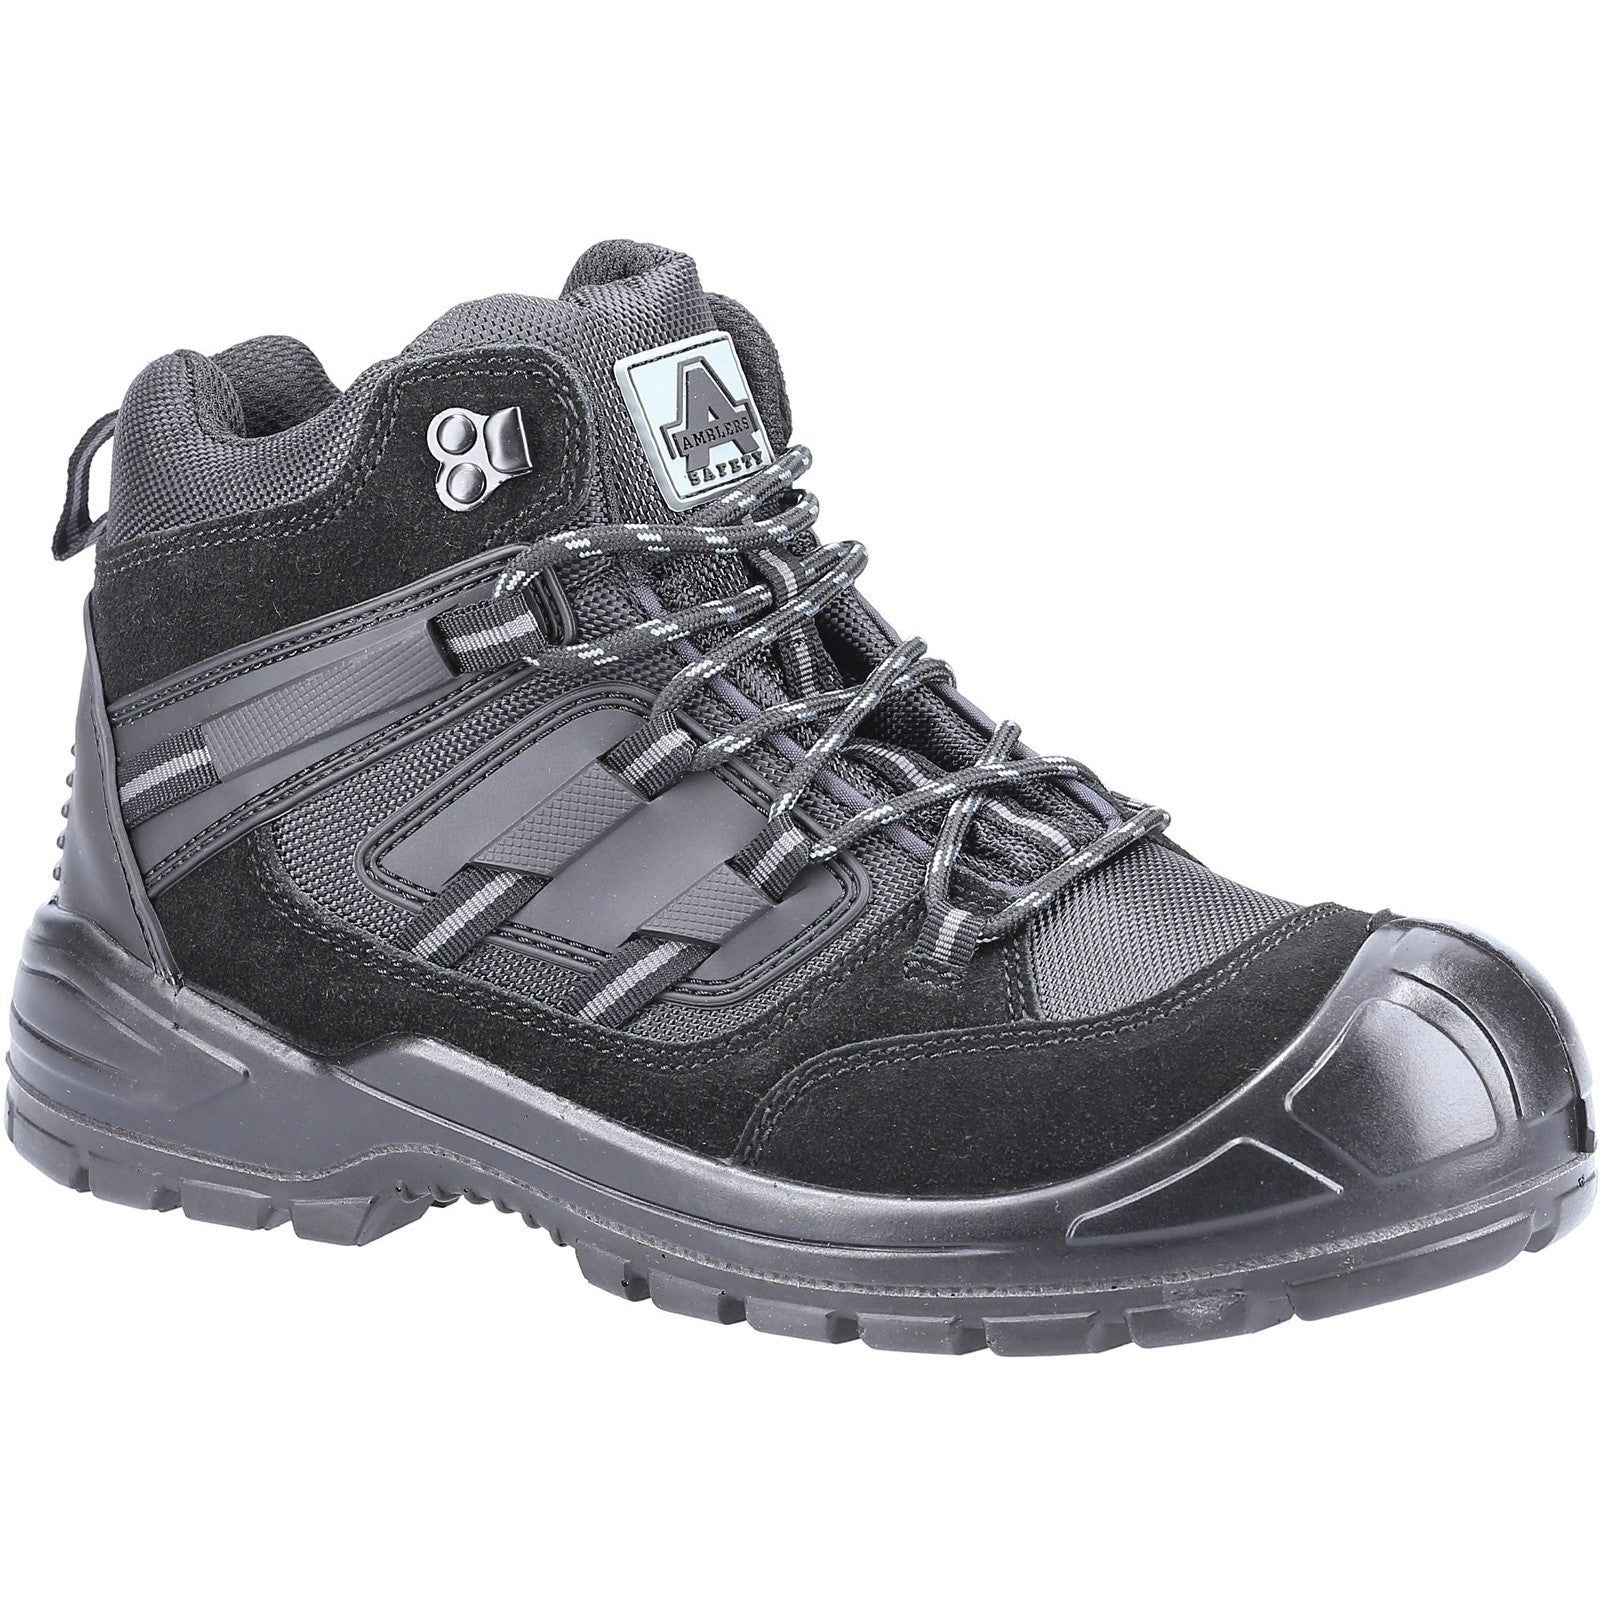 Amblers 257 Safety Boot - Black